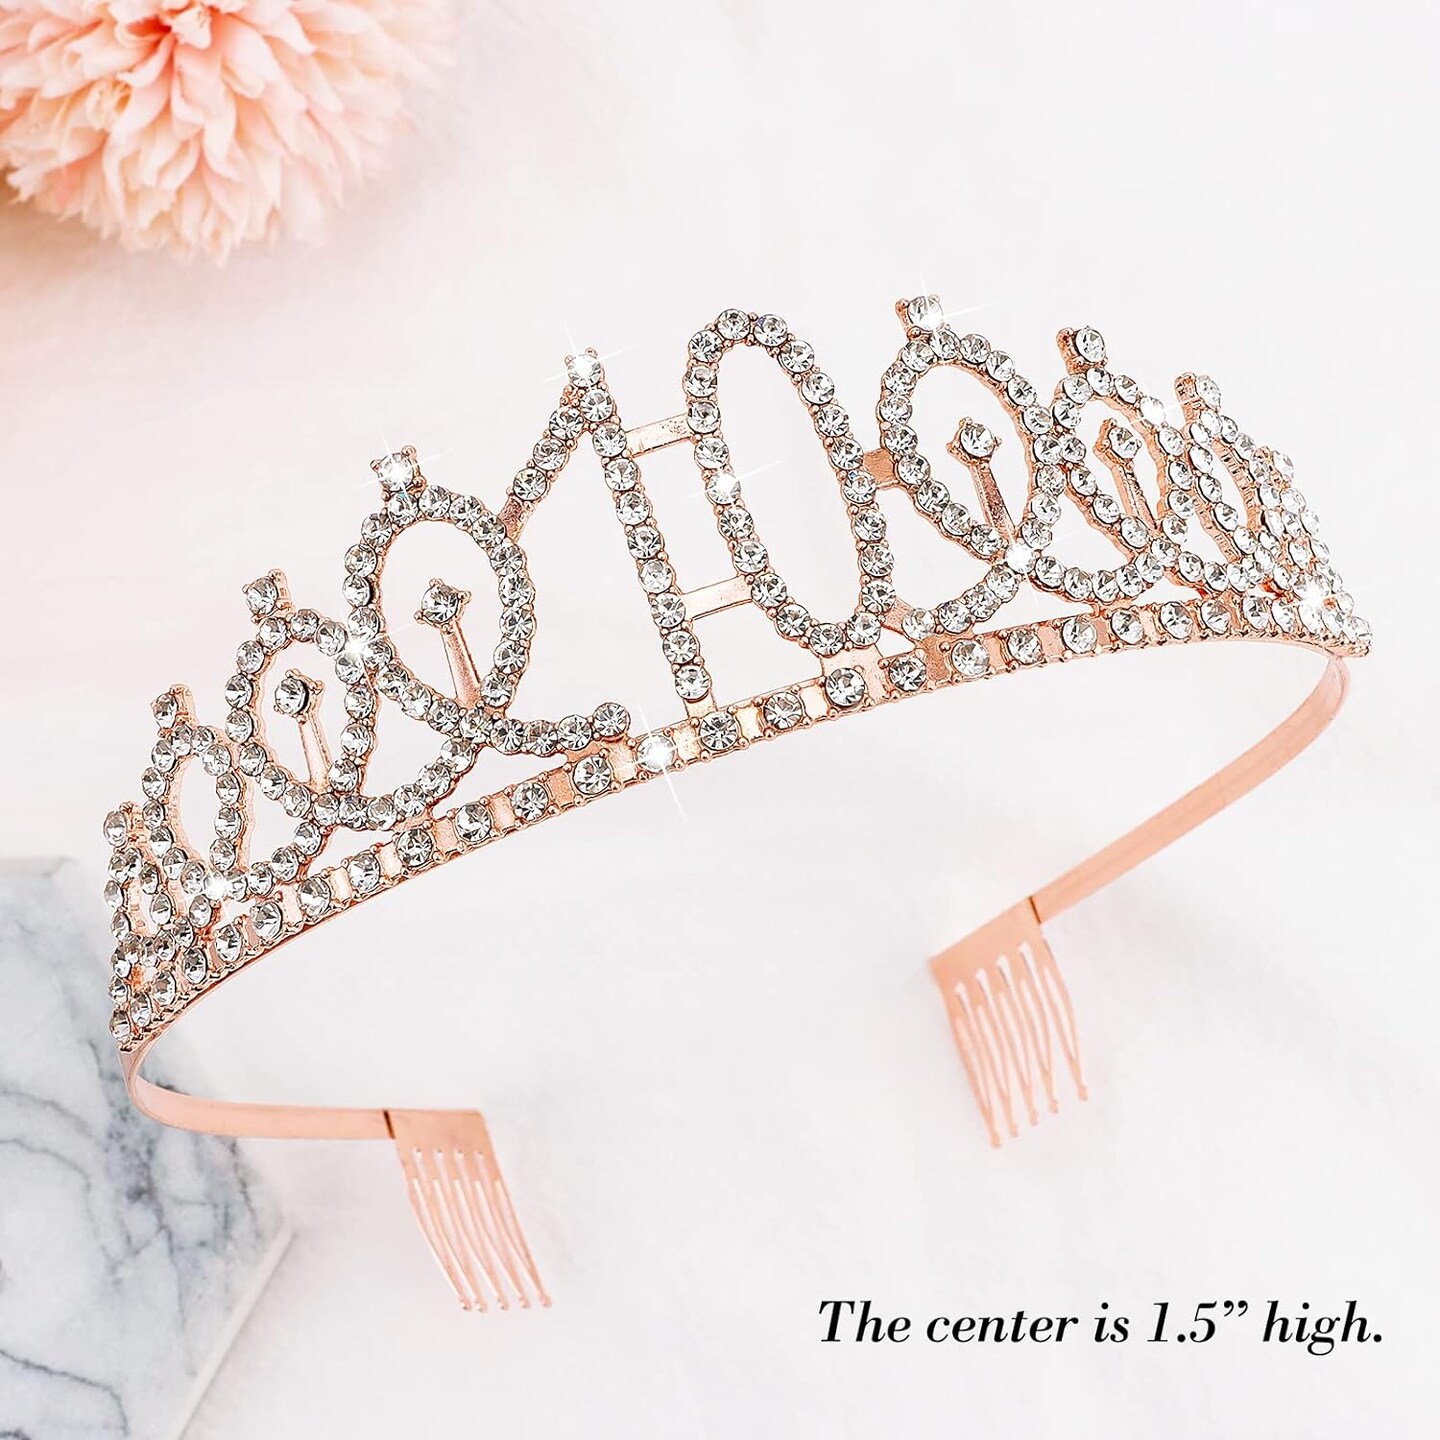 10th Birthday Crown and Sash + Pearl Pin Set, 10th Birthday Decorations for Girl 10 Year Old Girl Birthday Gifts 10th It&#x27;s My 10th Birthday Happy 10th Birthday Party Favor Supplies